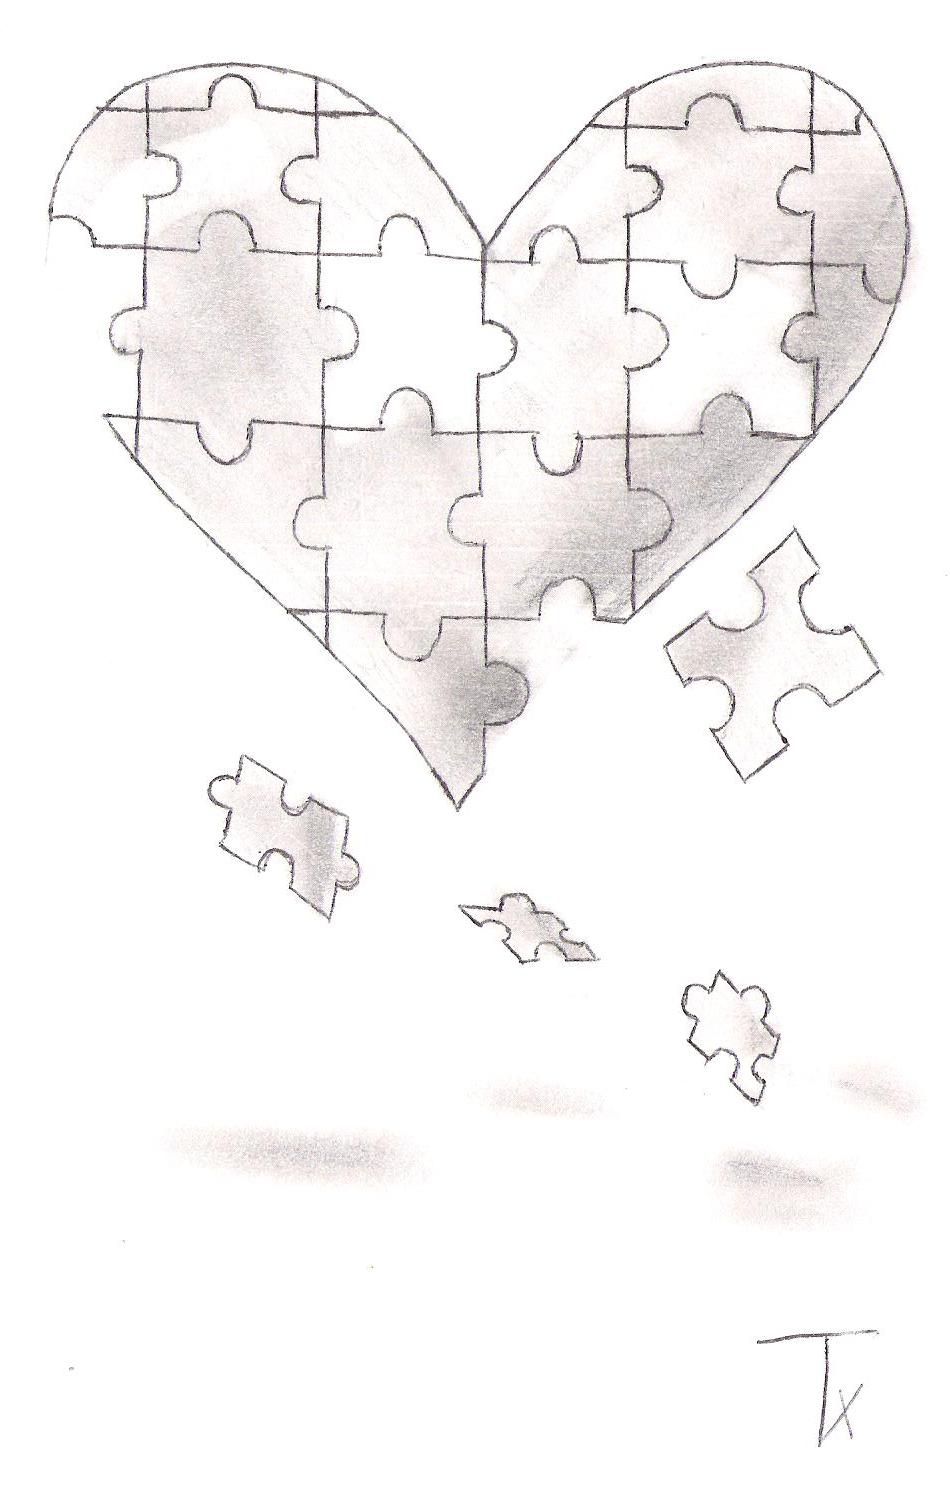 Source Sitcom Agriculture Puzzle Heart by GhostAZ on DeviantArt